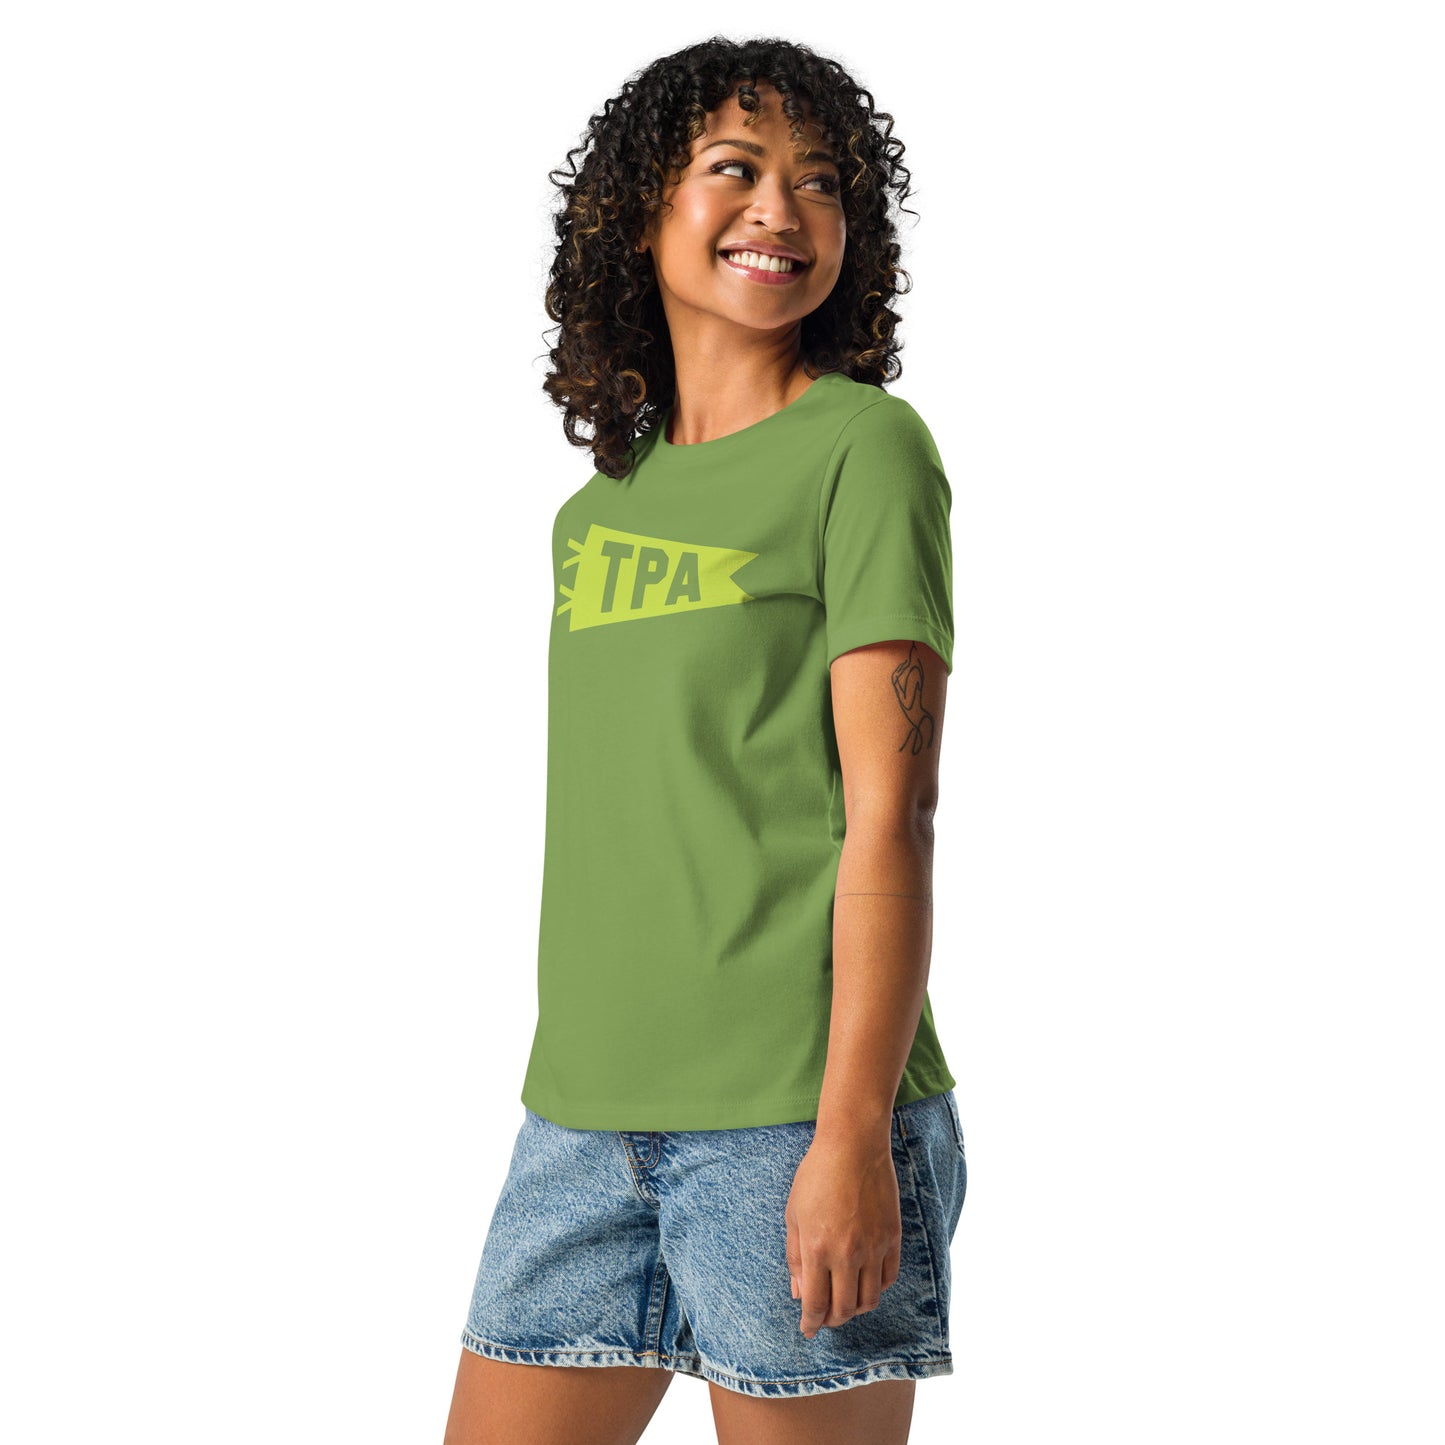 Airport Code Women's Tee - Green Graphic • TPA Tampa • YHM Designs - Image 06